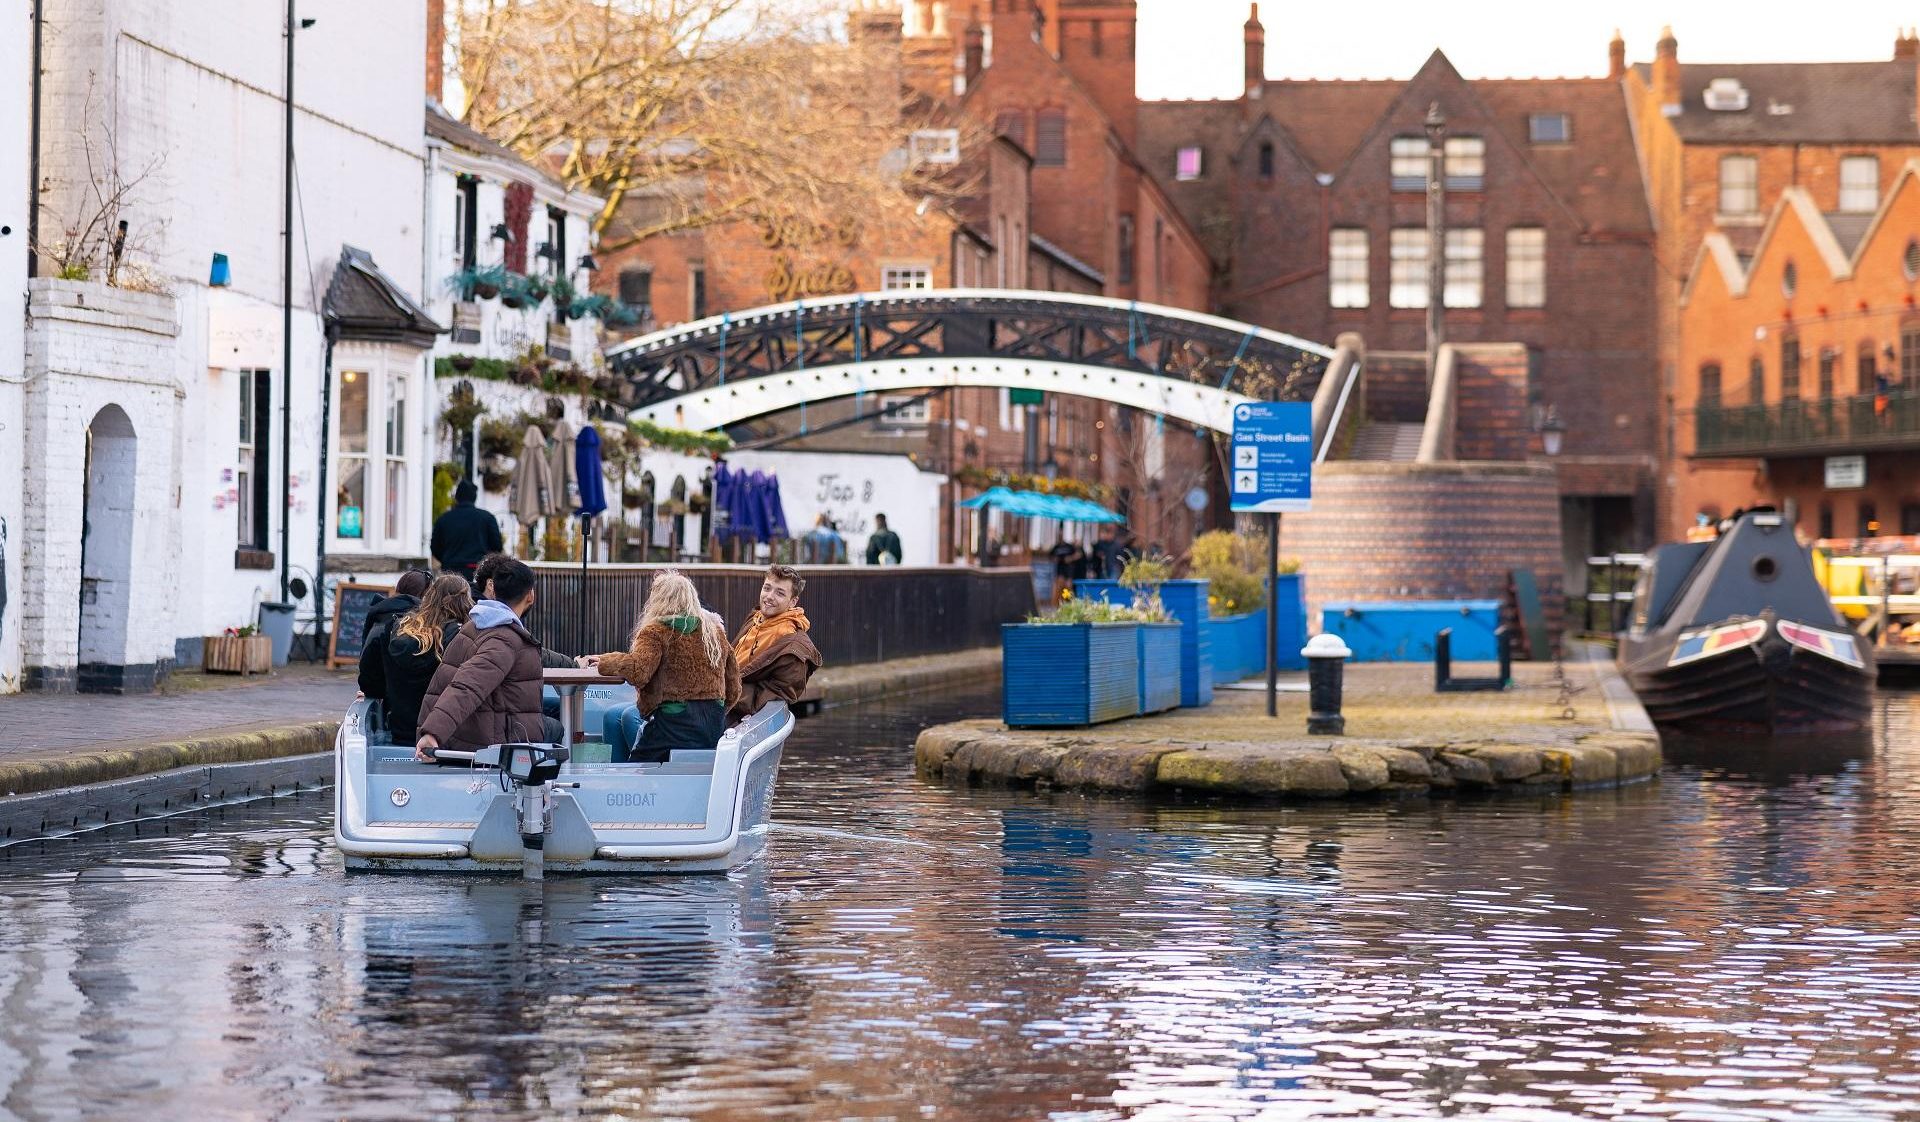 Save up to £44 on GoBoat canal trips on Westside this Black Friday -  Westside BID